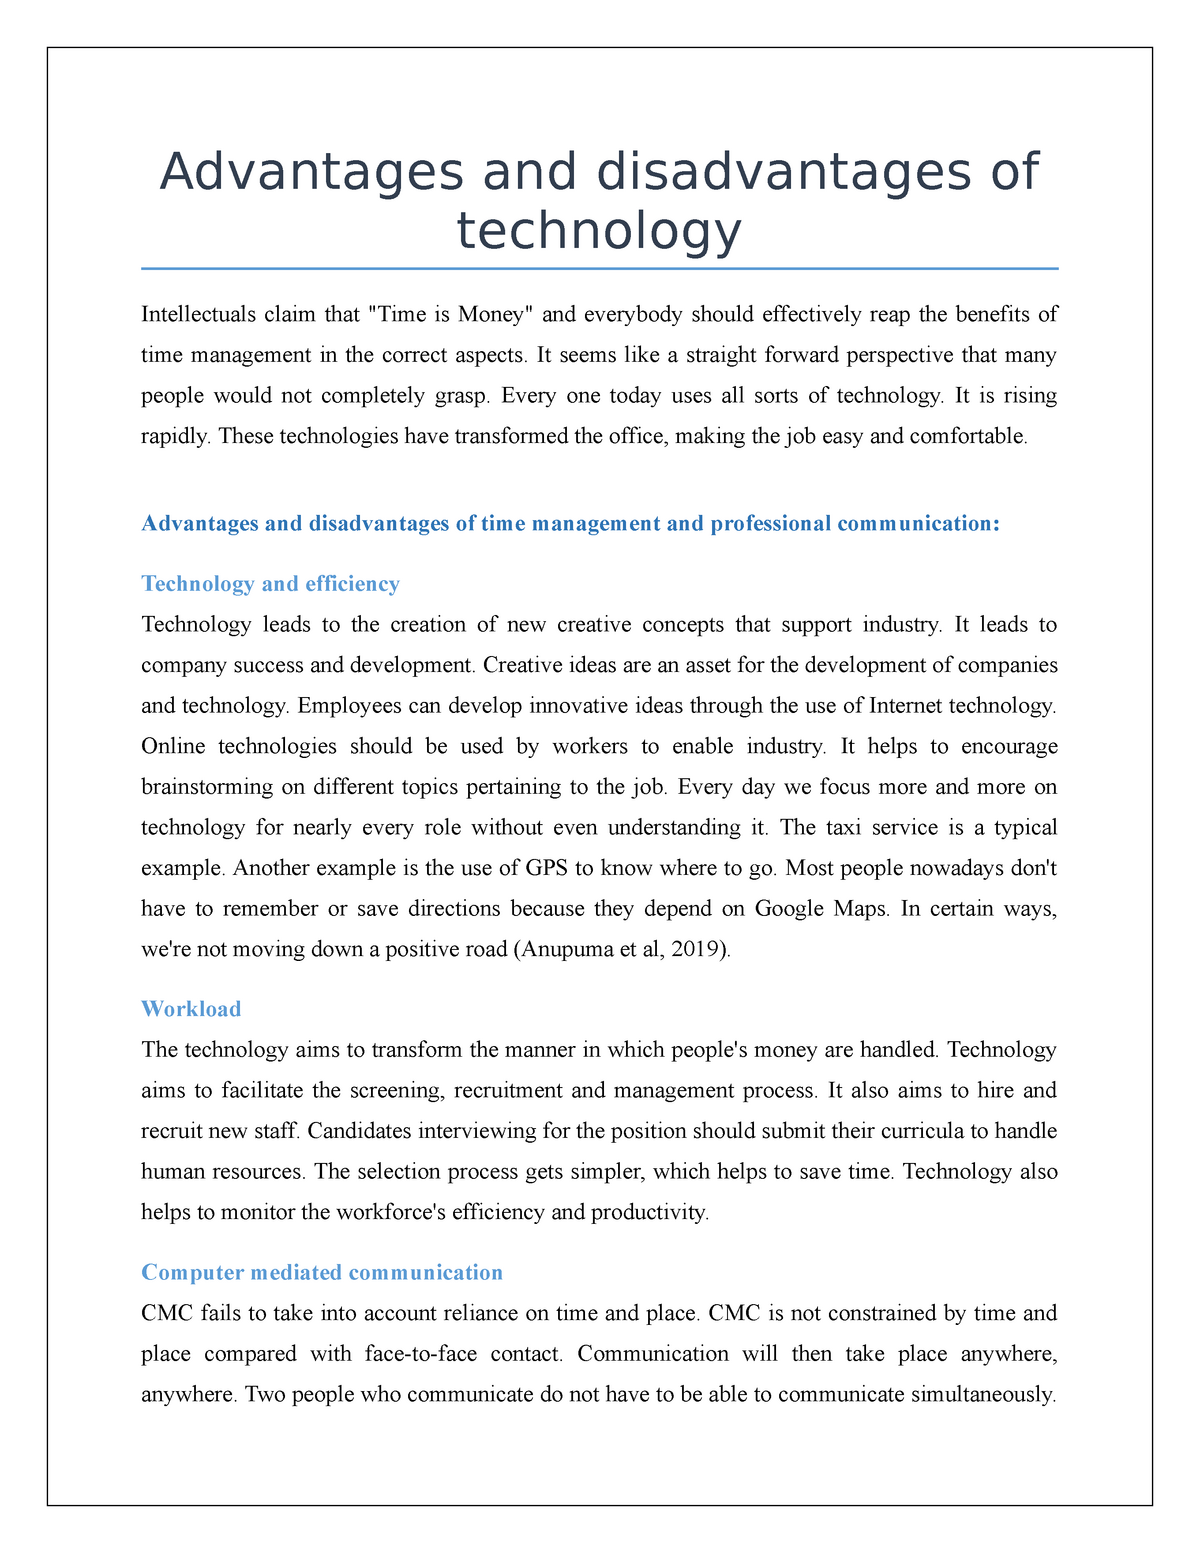 advantages and disadvantages of technology easy essay